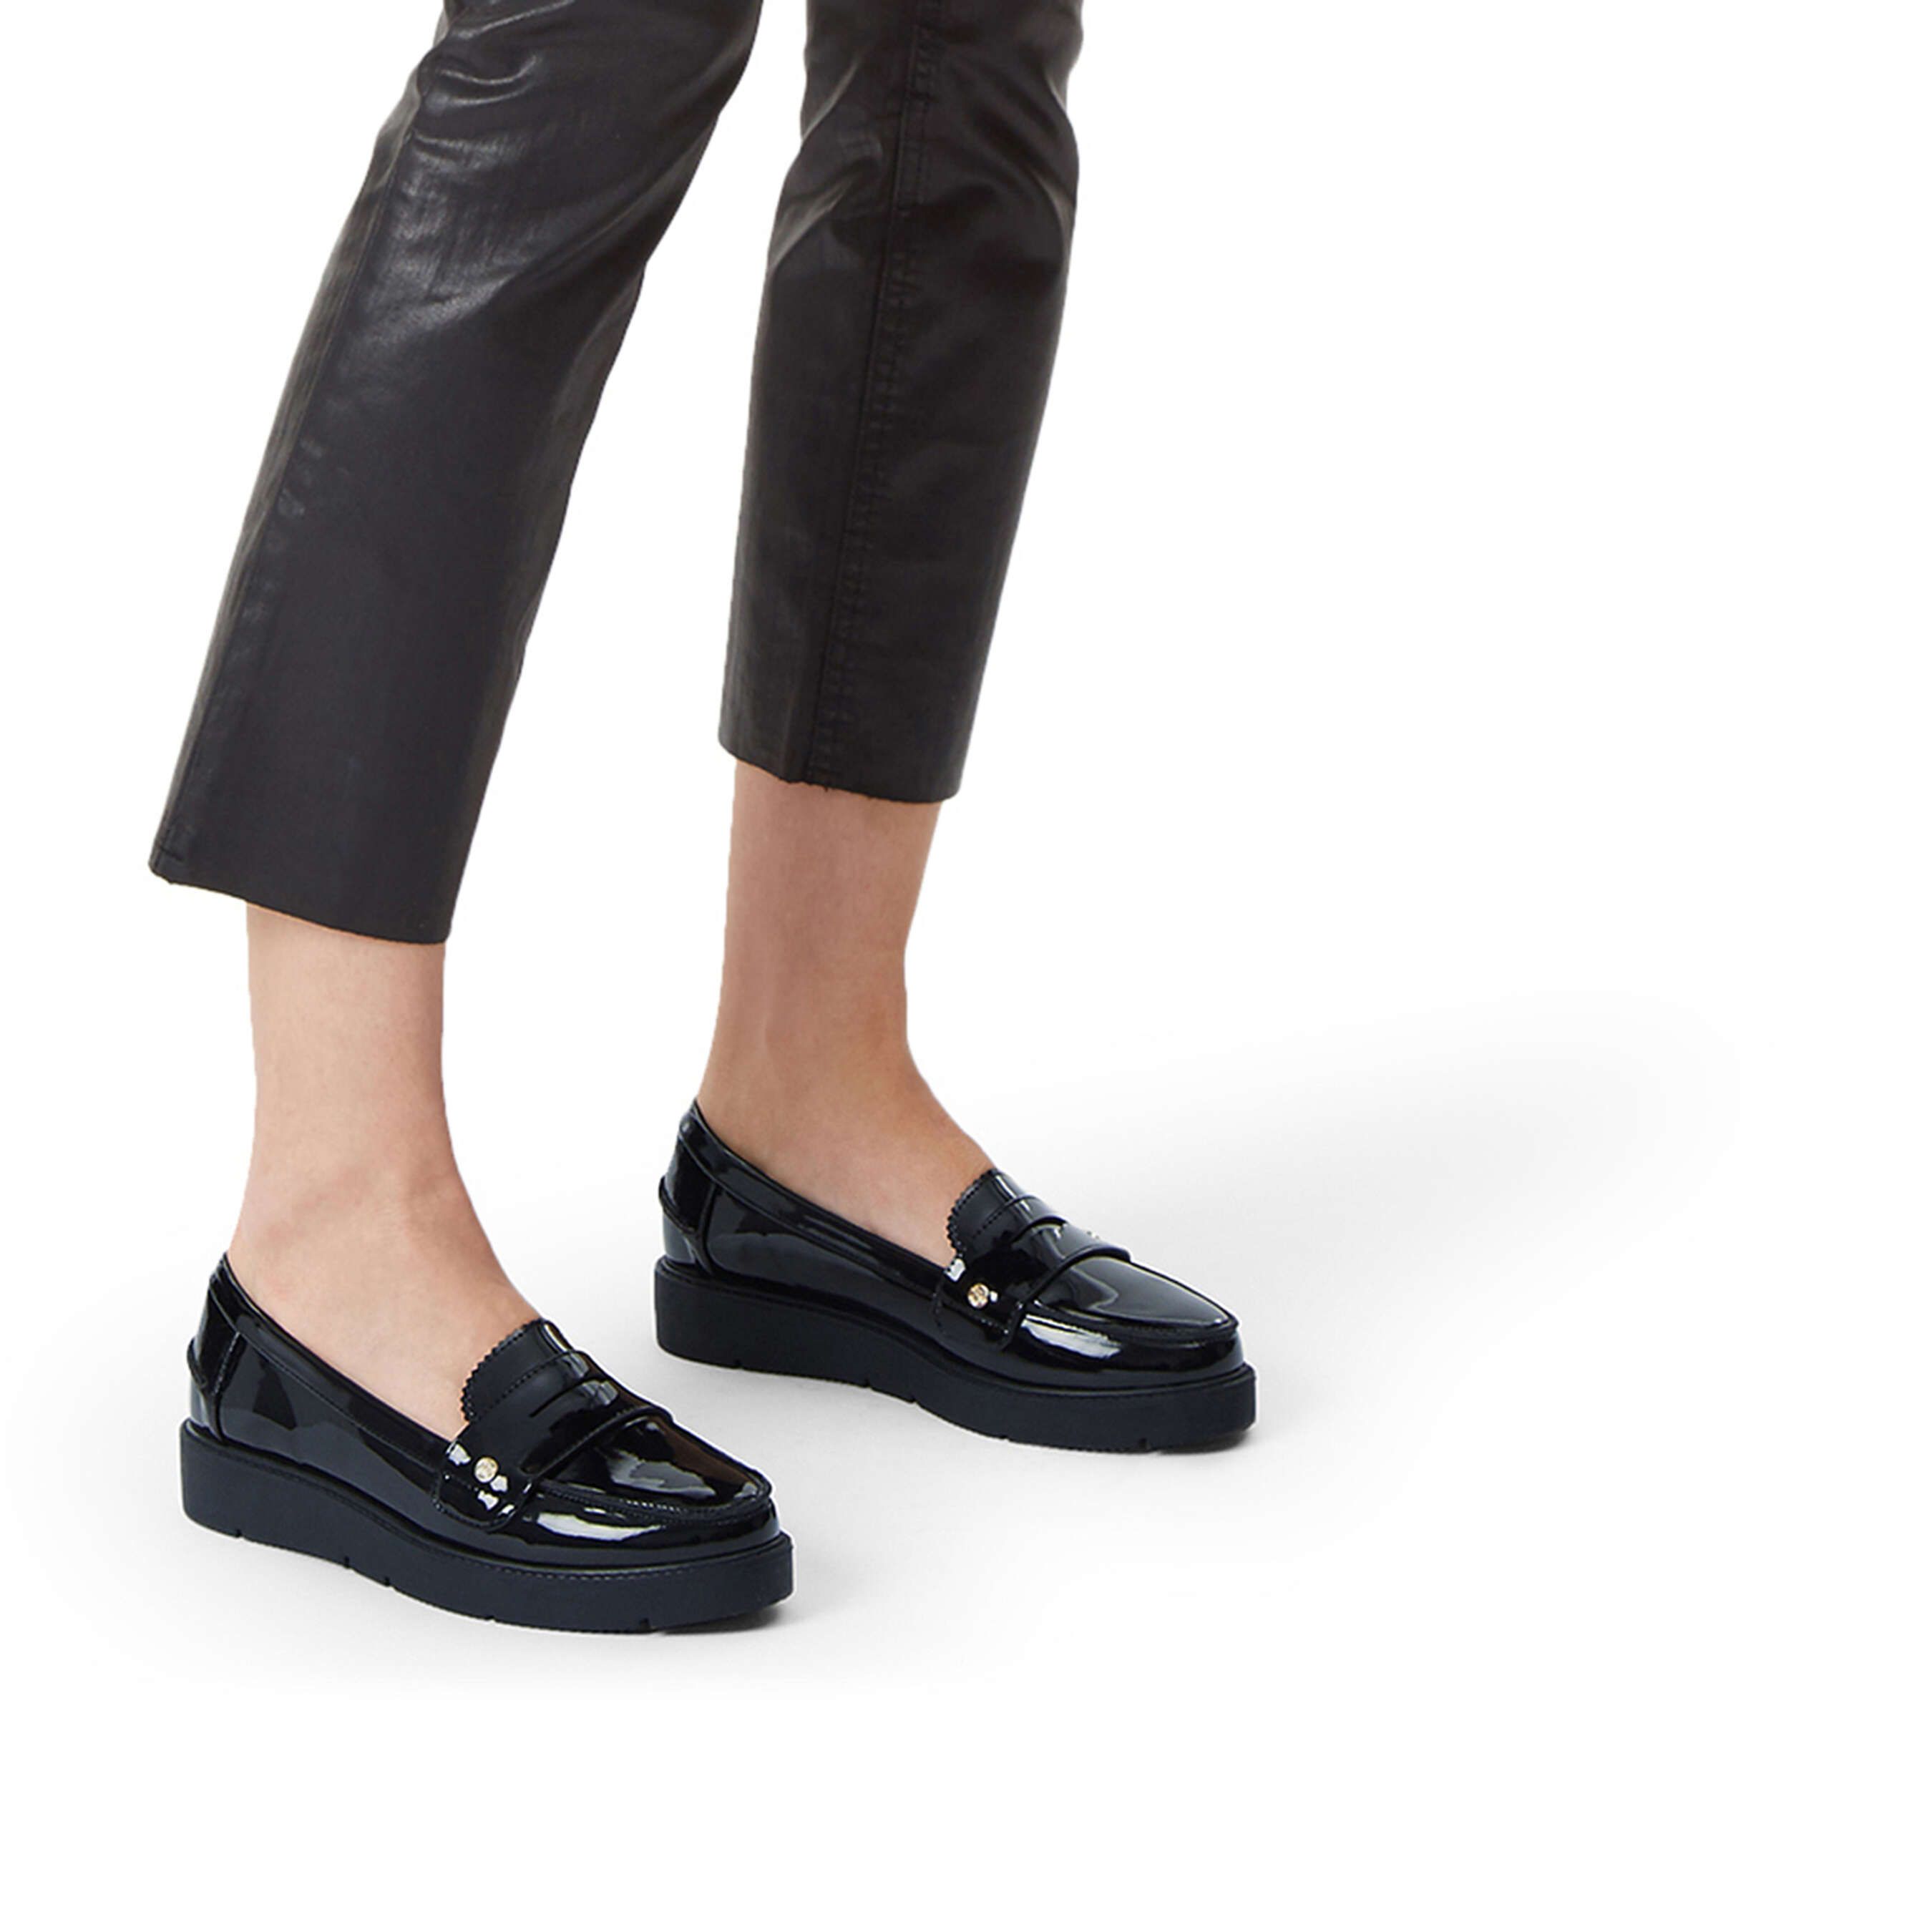 Work some polish into your professional looks with Miss KG's seductive Nieve loafer. This easy slip-on style is crafted in glossy black patent with a hardware pin and a touch of height hidden in the platform sole.